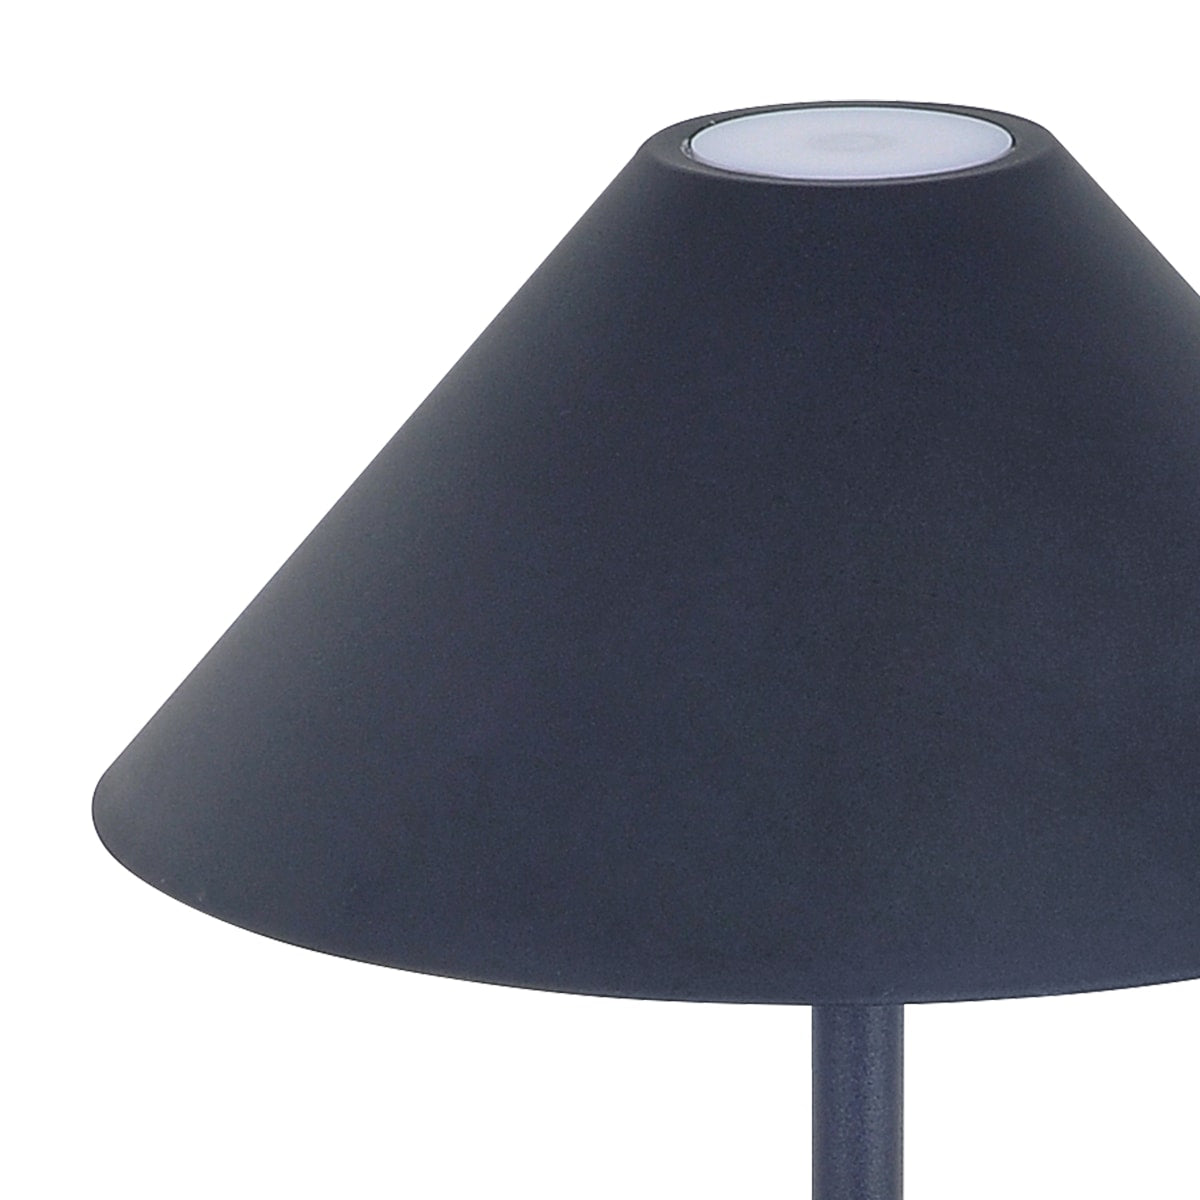 TABLE LAMP LIBERTY ALUMINIUM BLACK LED 3W WARM LIGHT BATTERY OPERATED WITH TOUCH IP54